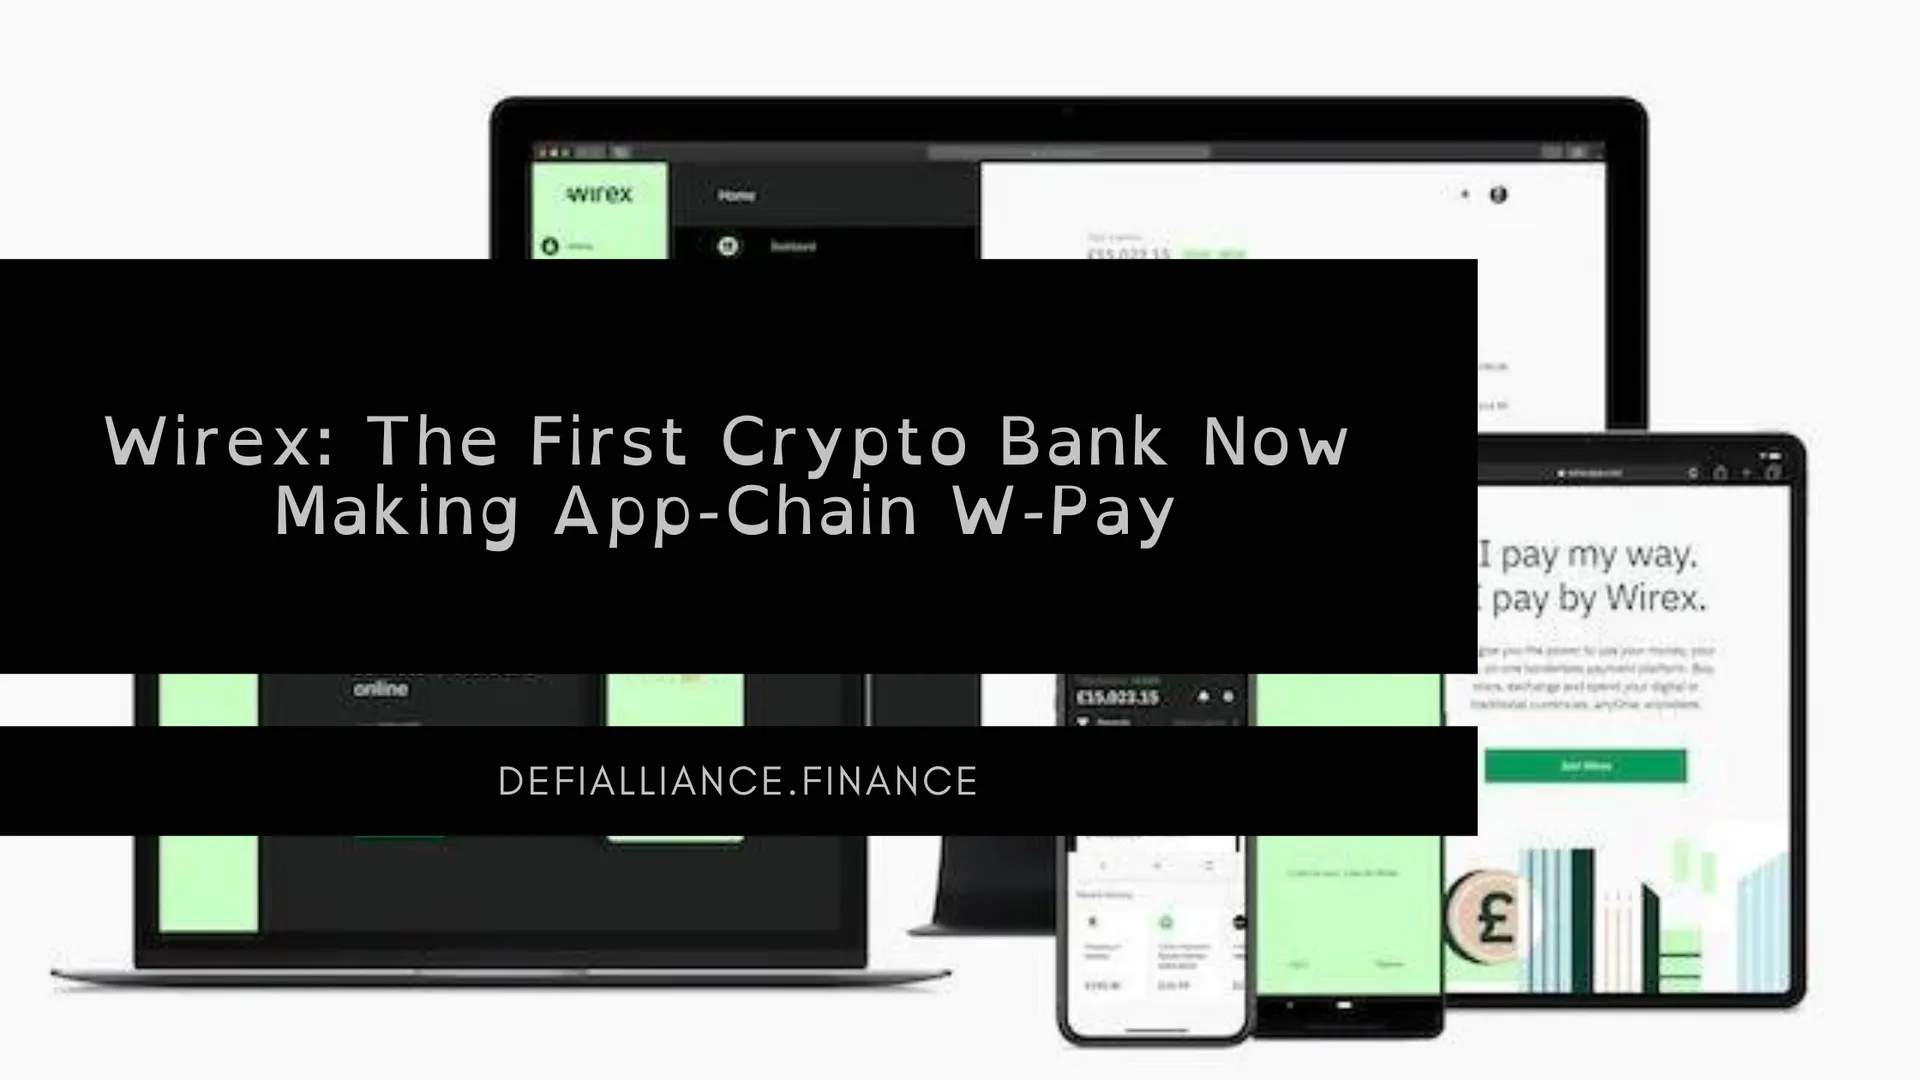 📢 Community Announcement: Explore the Future of Crypto Payments with Wirex's W-Pay! 🚀

Attention, crypto enthusiasts and blockchain aficionados! We are thrilled to share an exciting blog post that delves deep into the world of cryptocurrency payments. Wirex, the pioneering crypto bank, has just introduced its groundbreaking App Chain called W-Pay, and we couldn't be more excited!

🌐 Read the Full Article Here: Wirex: The First Crypto Bank Now Making App-Chain W-Pay https://blog.defialliance.finance/wirex-the-first-crypto-bank-now-making-app-chain-w-pay-9b7df444b9f7 

In this comprehensive blog post, you'll discover the incredible features of W-Pay, its integration with Polygon CDK, and the innovative payment use cases it offers. This is a game-changer for the crypto payment industry, and you won't want to miss out on the details.

Here's a sneak peek of what you'll find in the article:

🚀 W-Pay Features: Learn about the cutting-edge technology behind W-Pay, including its Zero-Knowledge (ZK) foundation, Ethereum Virtual Machine (EVM) compatibility, high throughput, and more.

🔗 Polygon CDK: Explore why Wirex chose Polygon CDK and how this decision benefits the entire crypto community.

💰 WXT Utility: Discover the role of Wirex Token (WXT) as the primary gas token within the W-Pay ecosystem.

💳 Pioneering Payment Use Cases: Uncover the revolutionary non-custodial Debit Cards linked to W-Pay, enabling seamless crypto payments wherever Visa is accepted.

🌐 The Future of Payments: Gain insights into Wirex's commitment to driving mass adoption of crypto payments, backed by scalable and secure infrastructure.

Don't miss this opportunity to stay informed about the latest developments in the crypto world. Wirex is leading the way, and W-Pay is set to redefine the future of cryptocurrency payments.

👉 Read the Full Article Here: Wirex: The First Crypto Bank Now Making App-Chain W-Pay https://blog.defialliance.finance/wirex-the-first-crypto-bank-now-making-app-chain-w-pay-9b7df444b9f7 

Share this exciting news with your crypto community, and let's continue to shape the future of finance together! 🌟 #CryptoPayments #Wirex #WPAY #BlockchainRevolution